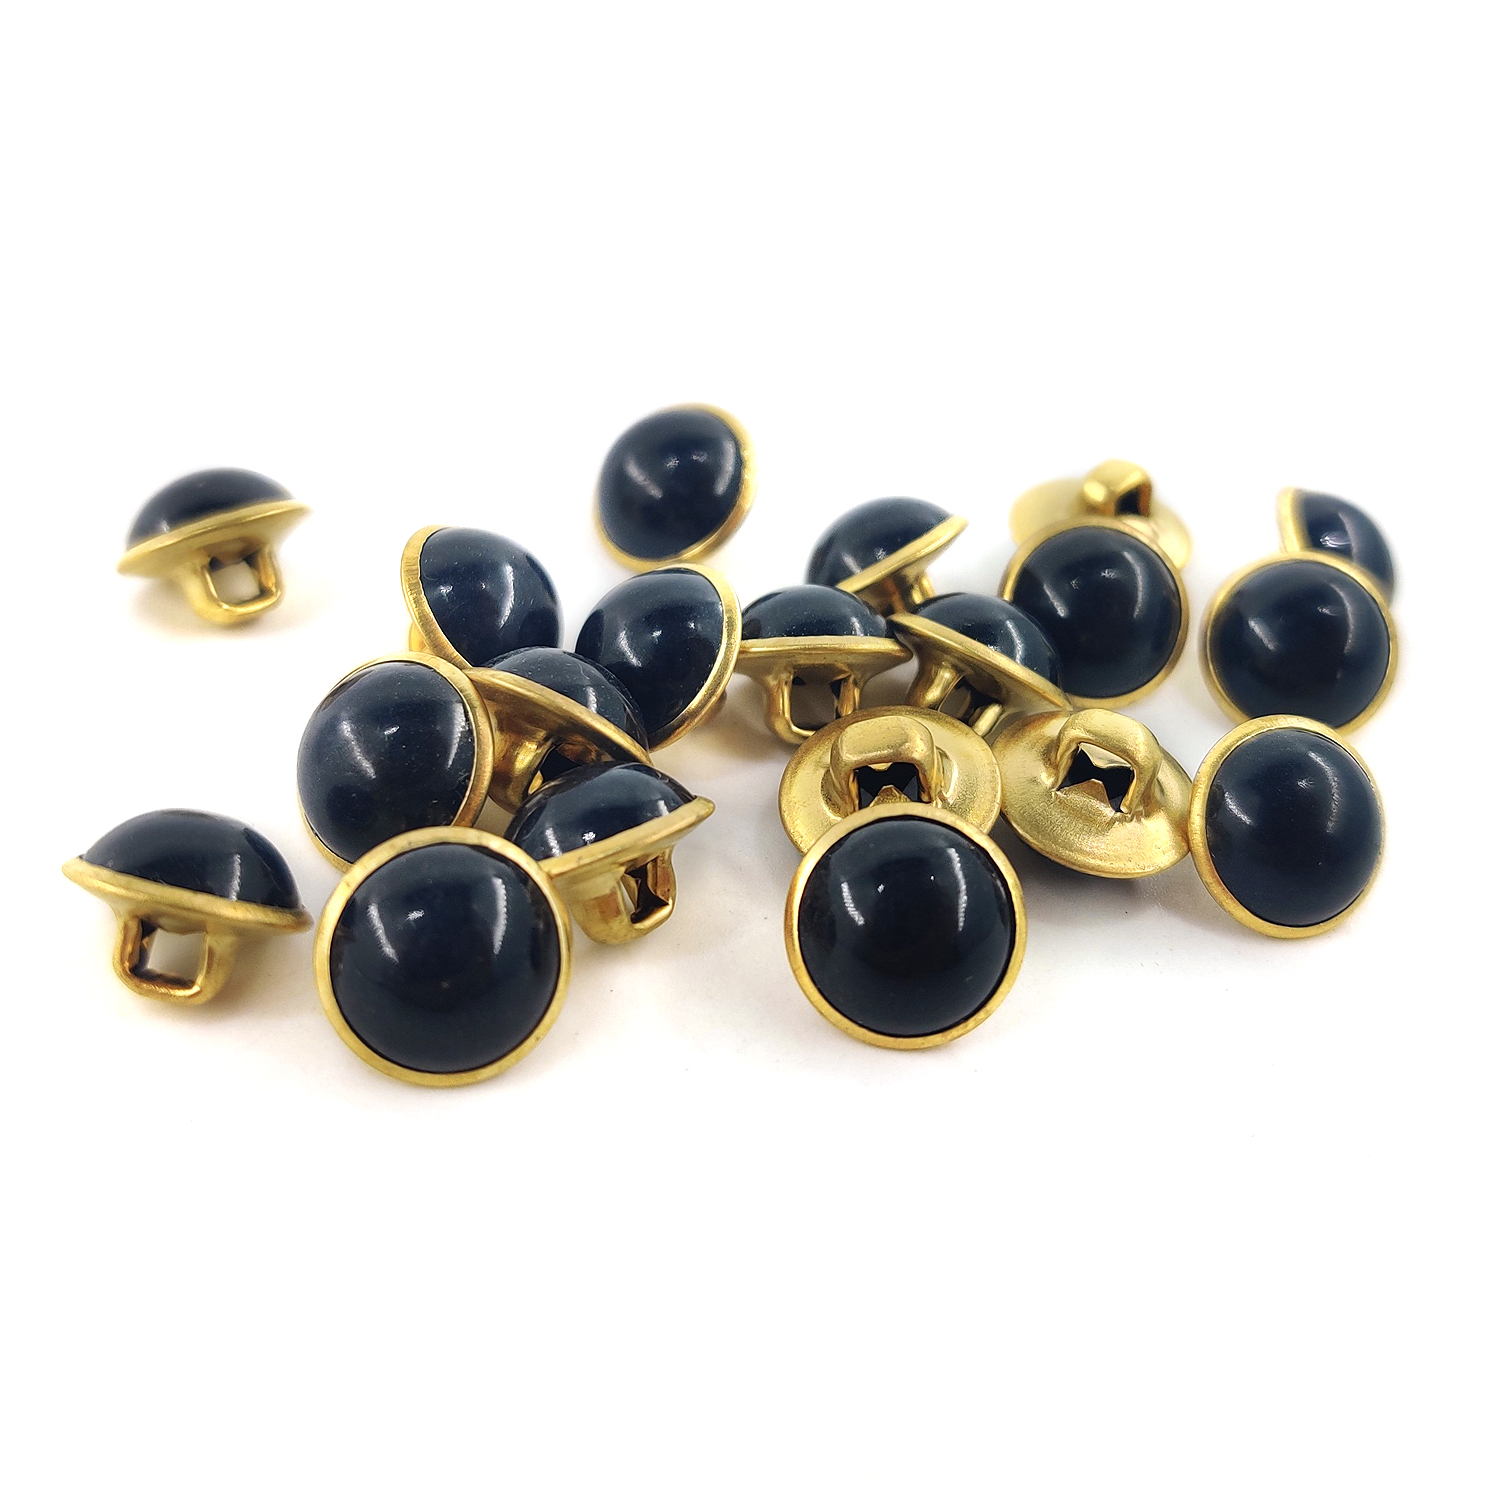 Craftisum Black Resin Sewing Buttons Brass Metal Base with Shank 30 Pcs - 10mm, 13/32"